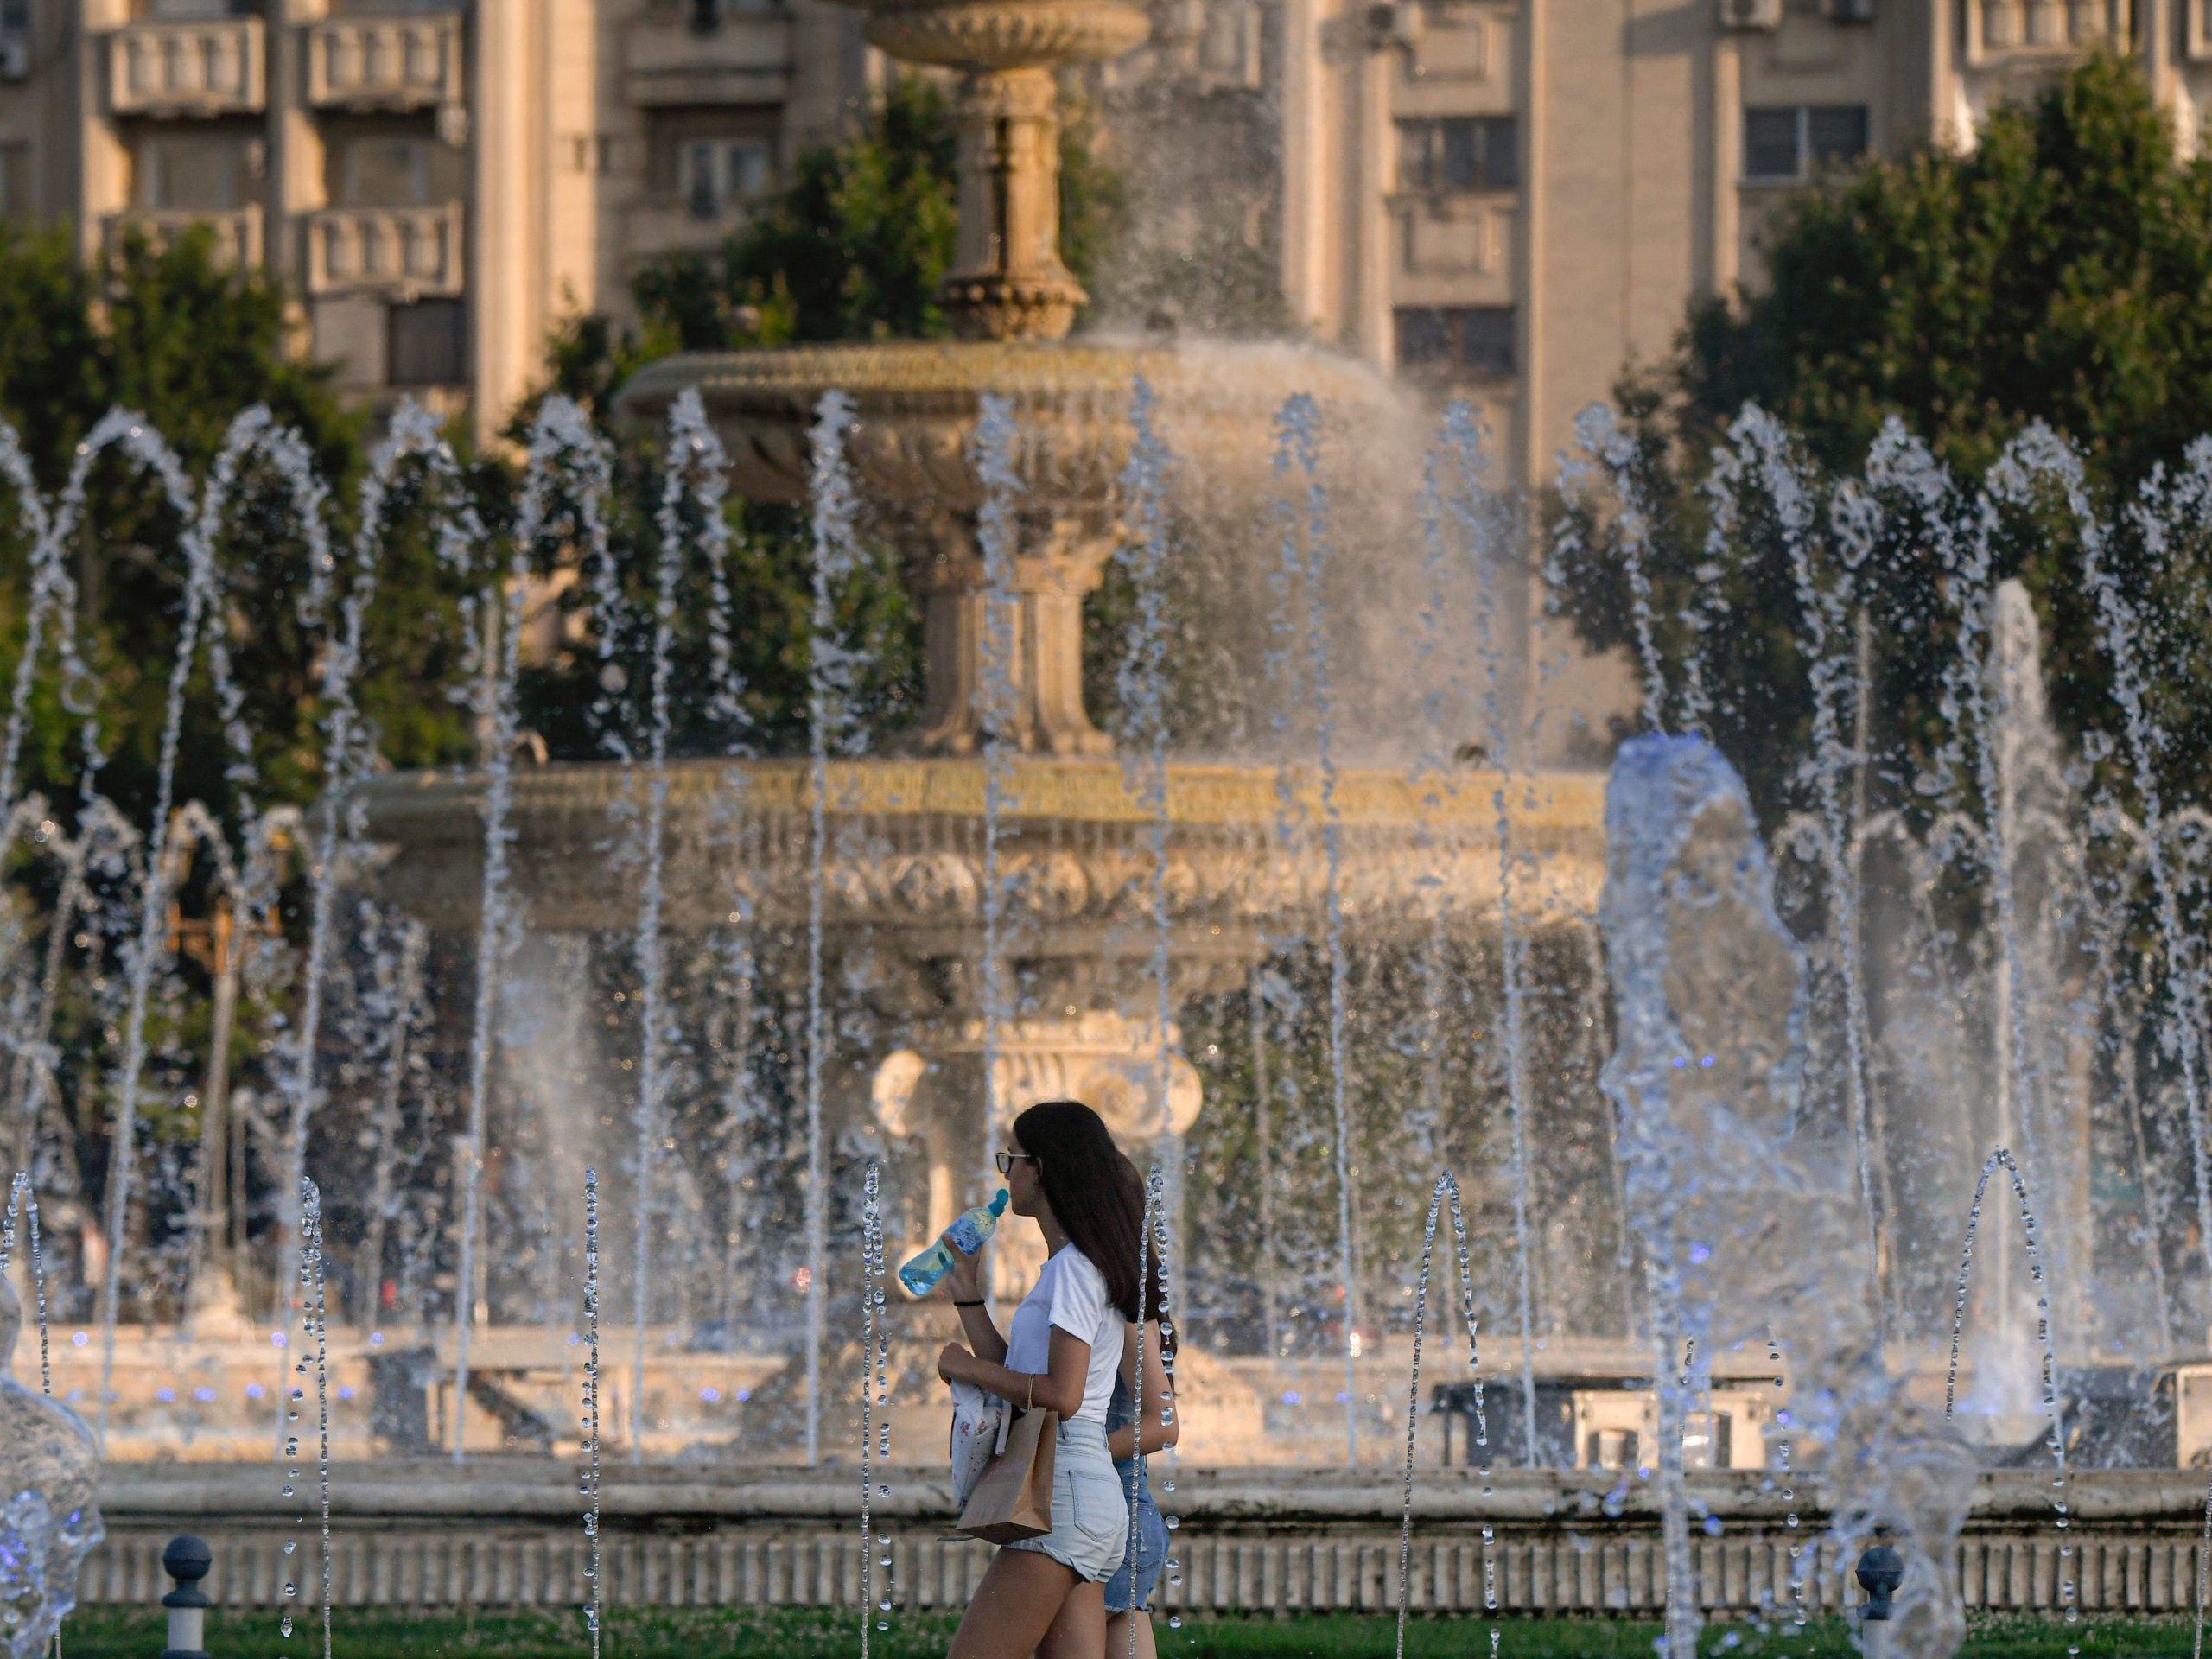 Woman walking in front of fountain